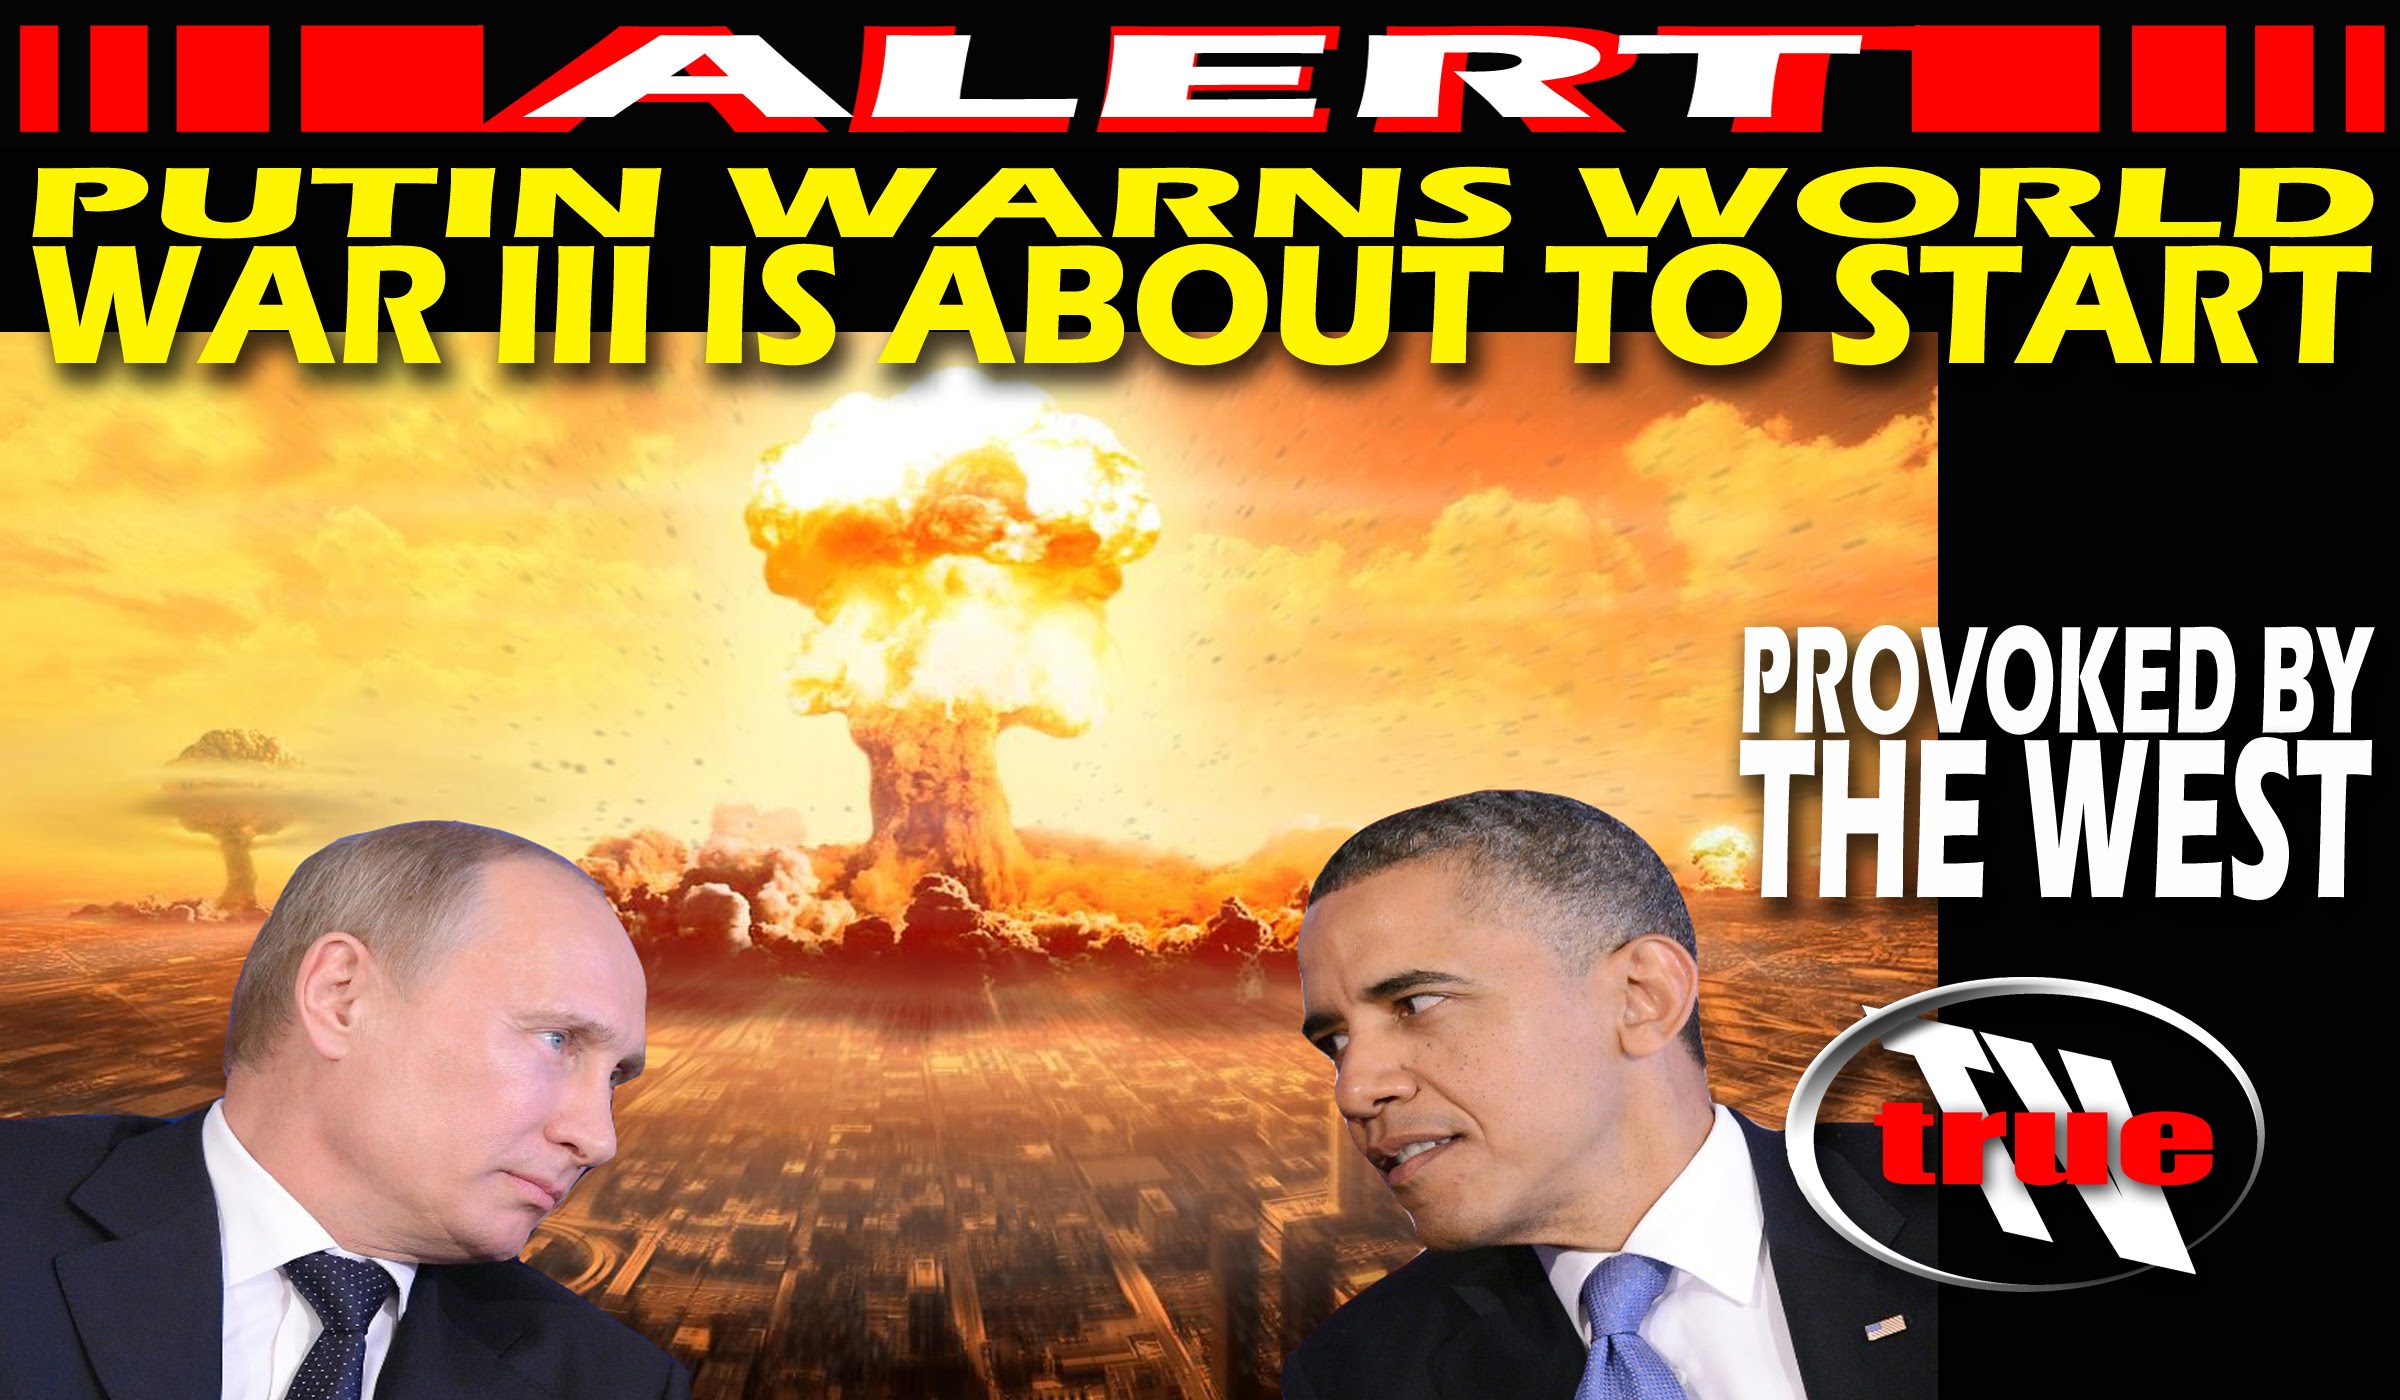 PUTIN WARNS WORLD WAR III IS ABOUT TO START PROVOKED BY THE WEST